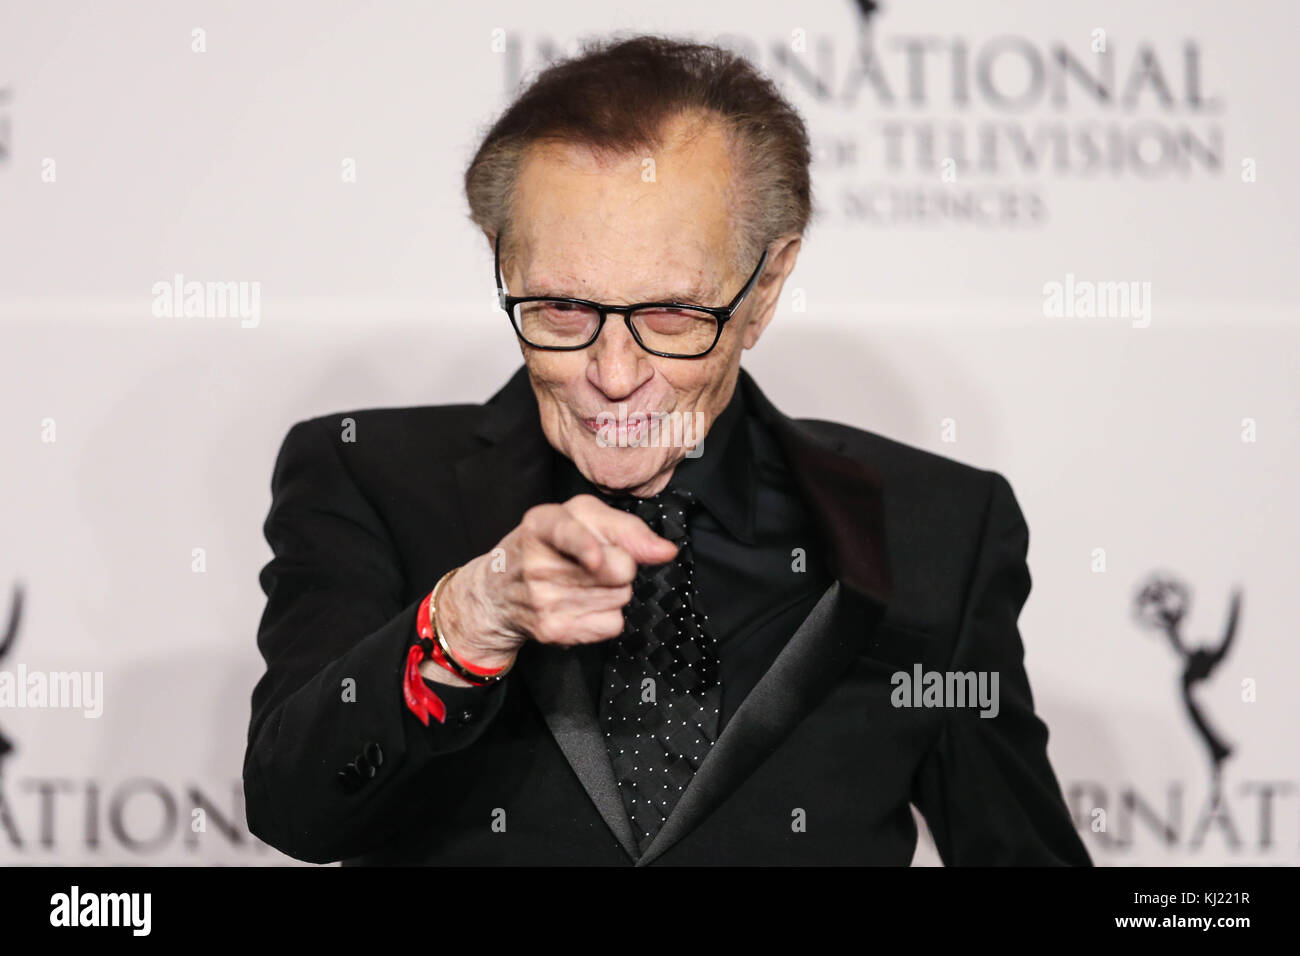 New York, USA. 20th Nov, 2017. Larry King during the 45th International Emmy awards gala in New York city on November 20, 2017. The International Emmy Award is an award ceremony bestowed by the International Academy of Television Arts and Sciences in recognition to the best television programs initially produced and aired outside the United States. Credit: Brazil Photo Press/Alamy Live News Stock Photo